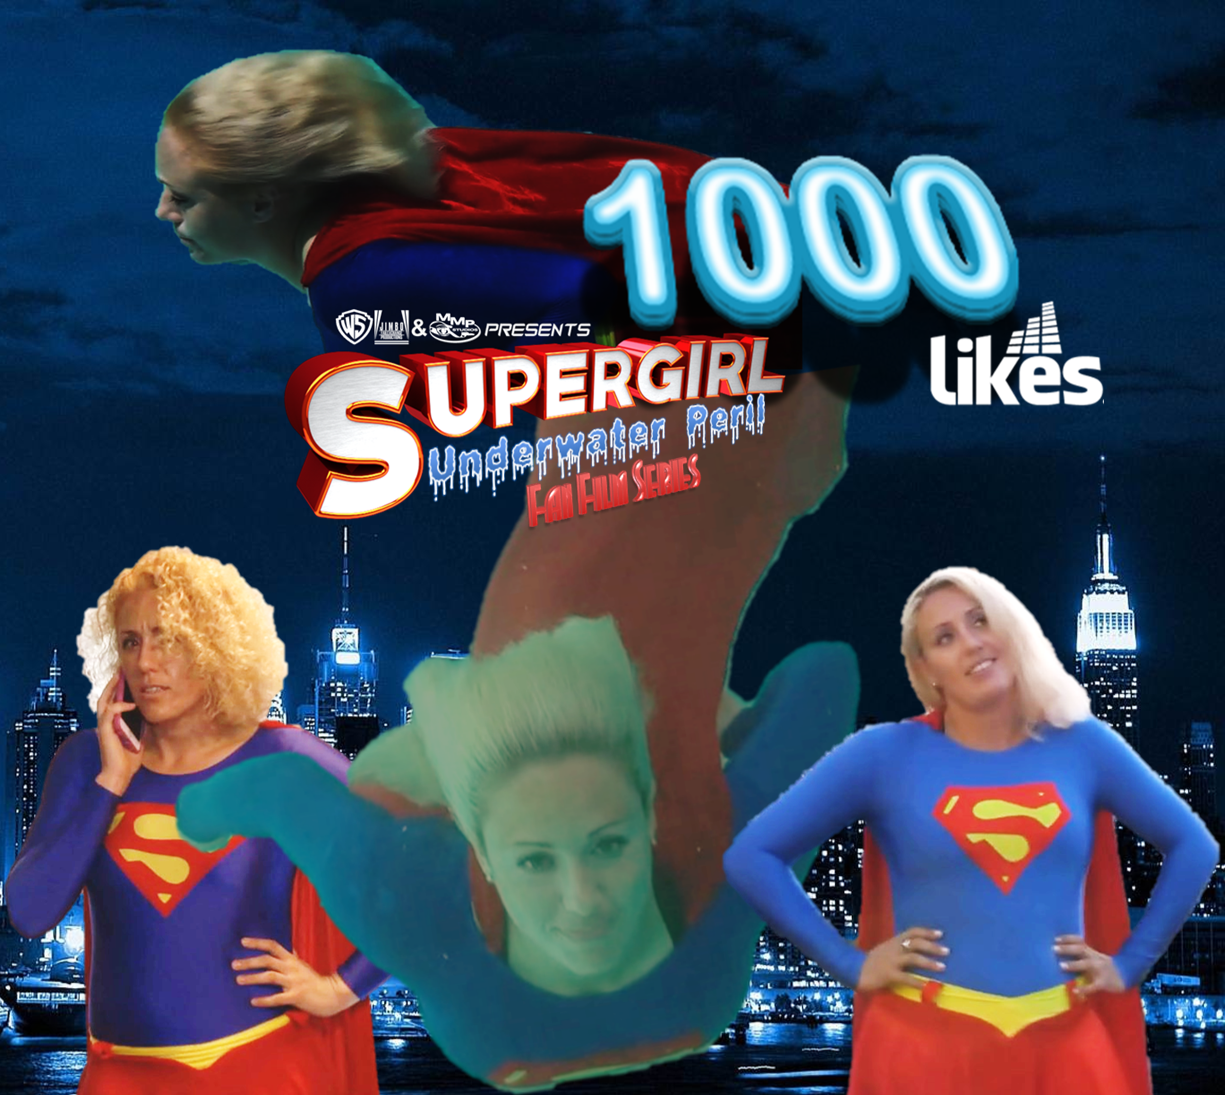 1000likesposter.png